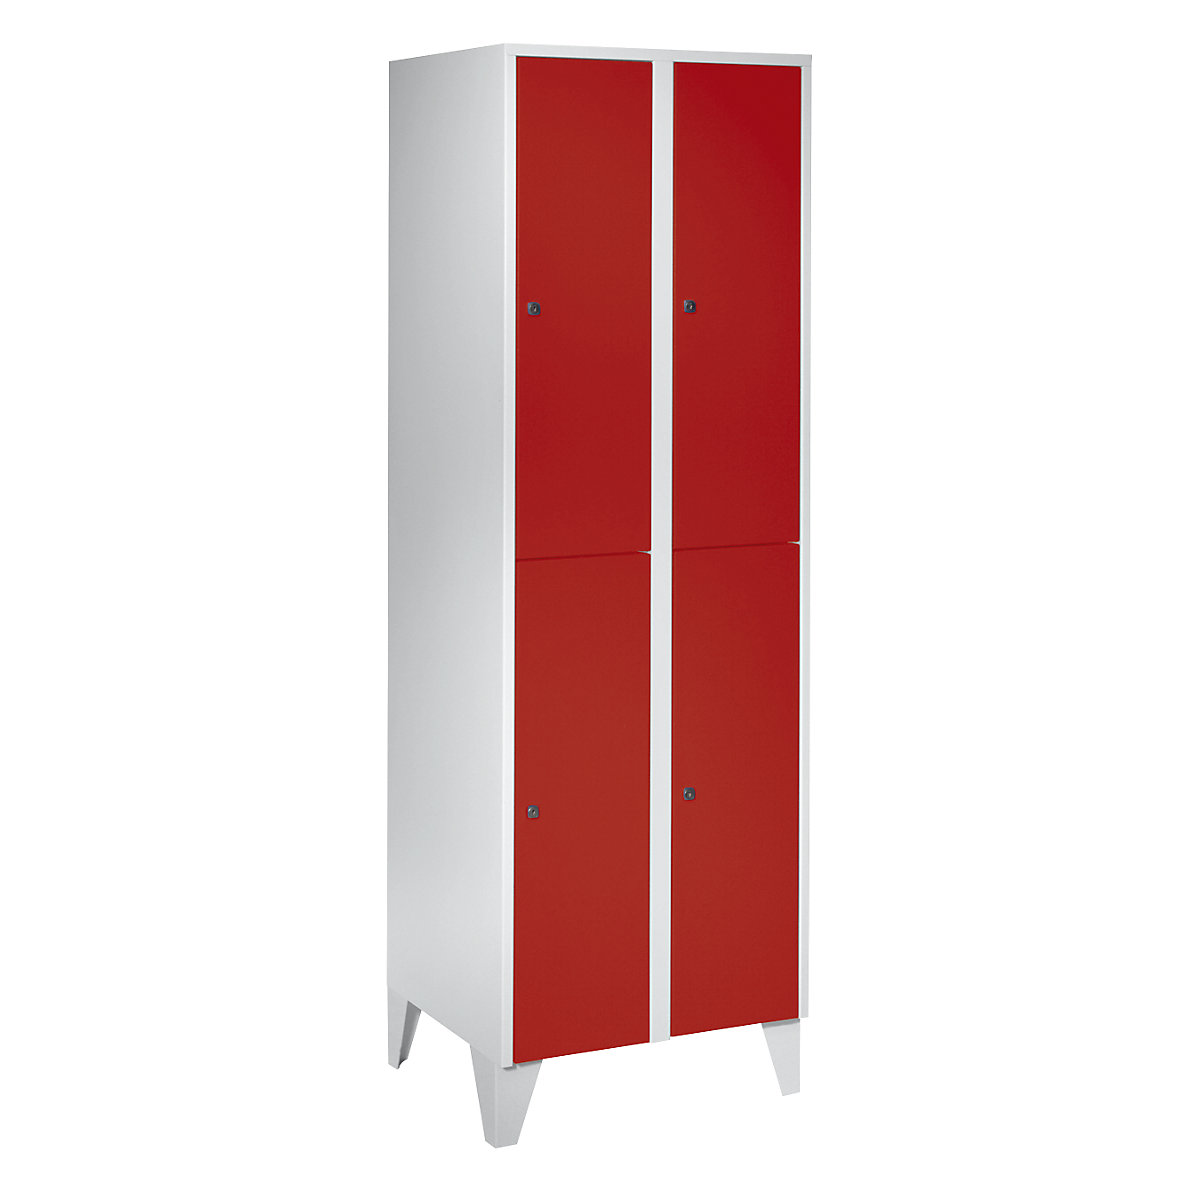 Cloakroom locker with feet – Wolf, HxWxD 1850 x 600 x 500 mm, 4 compartments, flame red-3